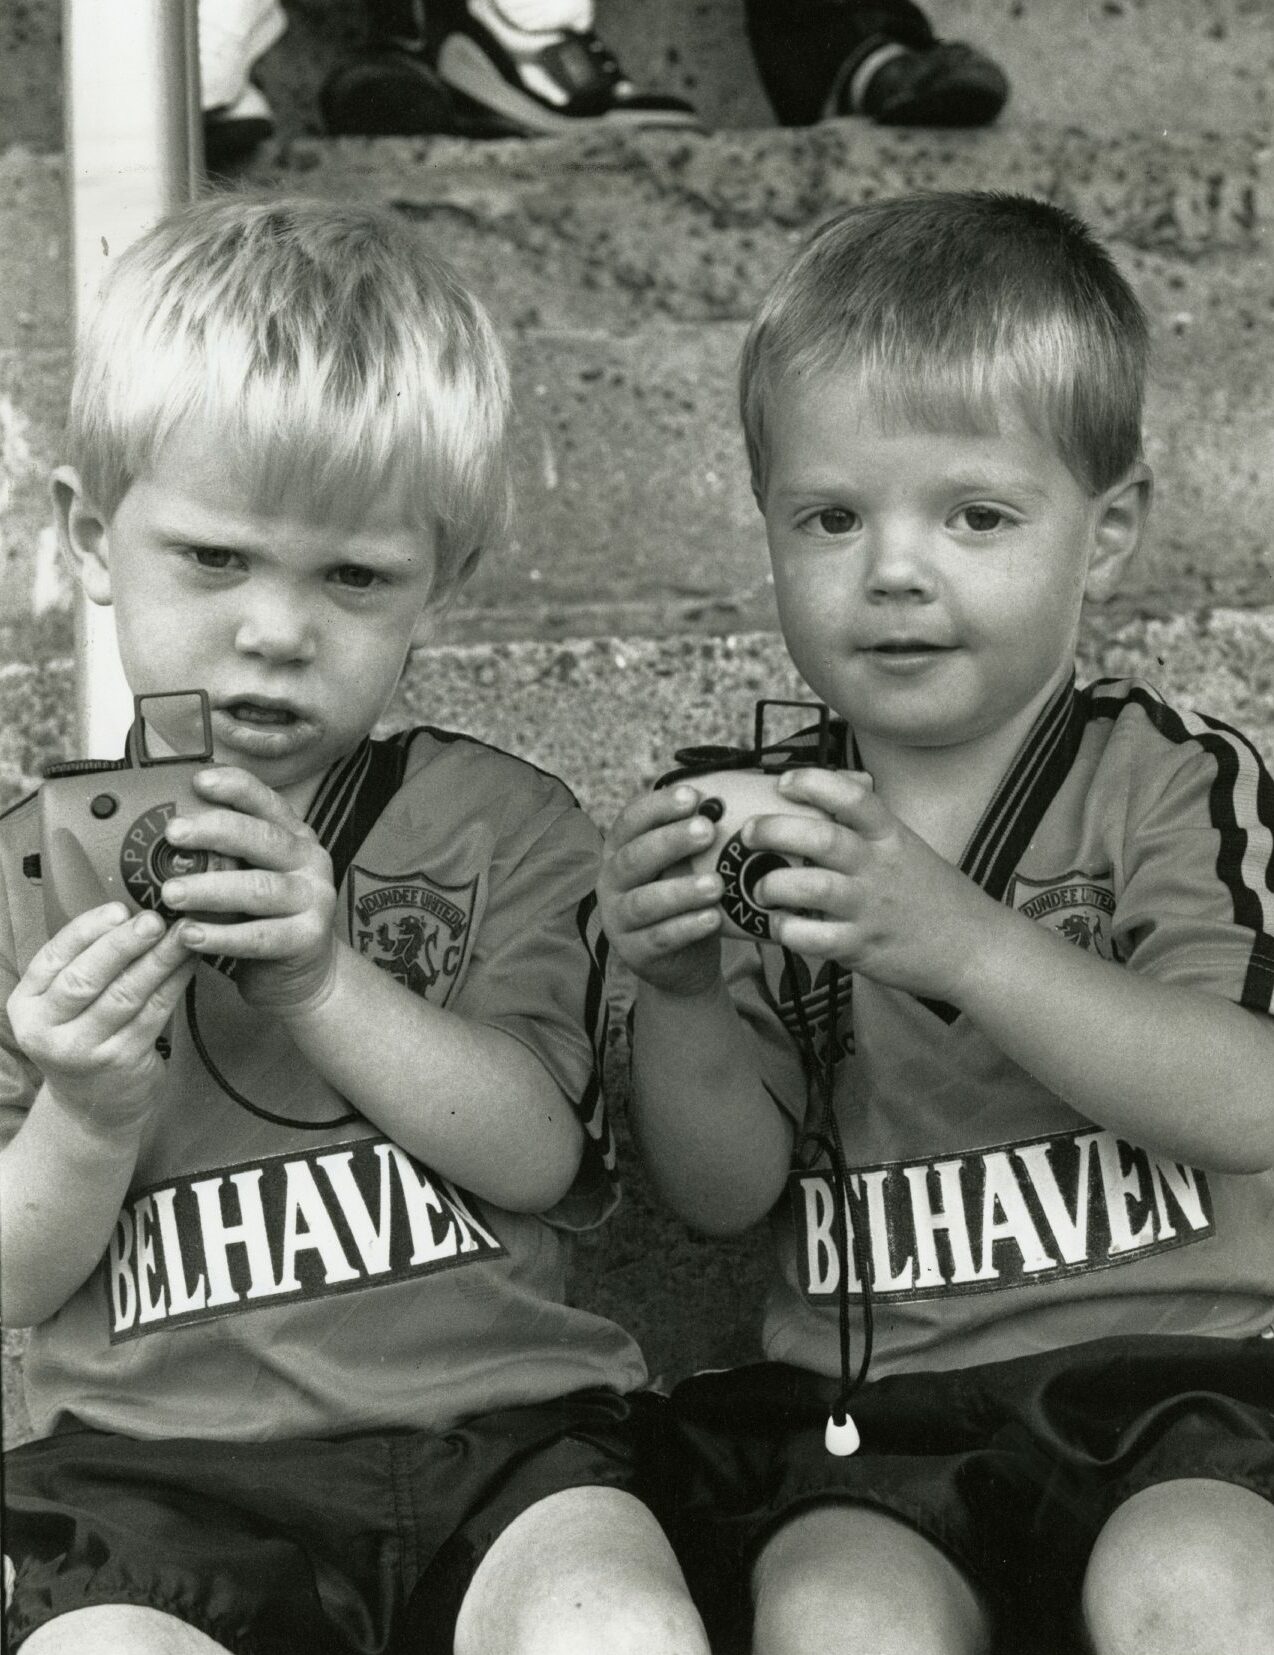 Young boys Kyle Payne and John Swindells getting ready to photograph their heroes in 1989